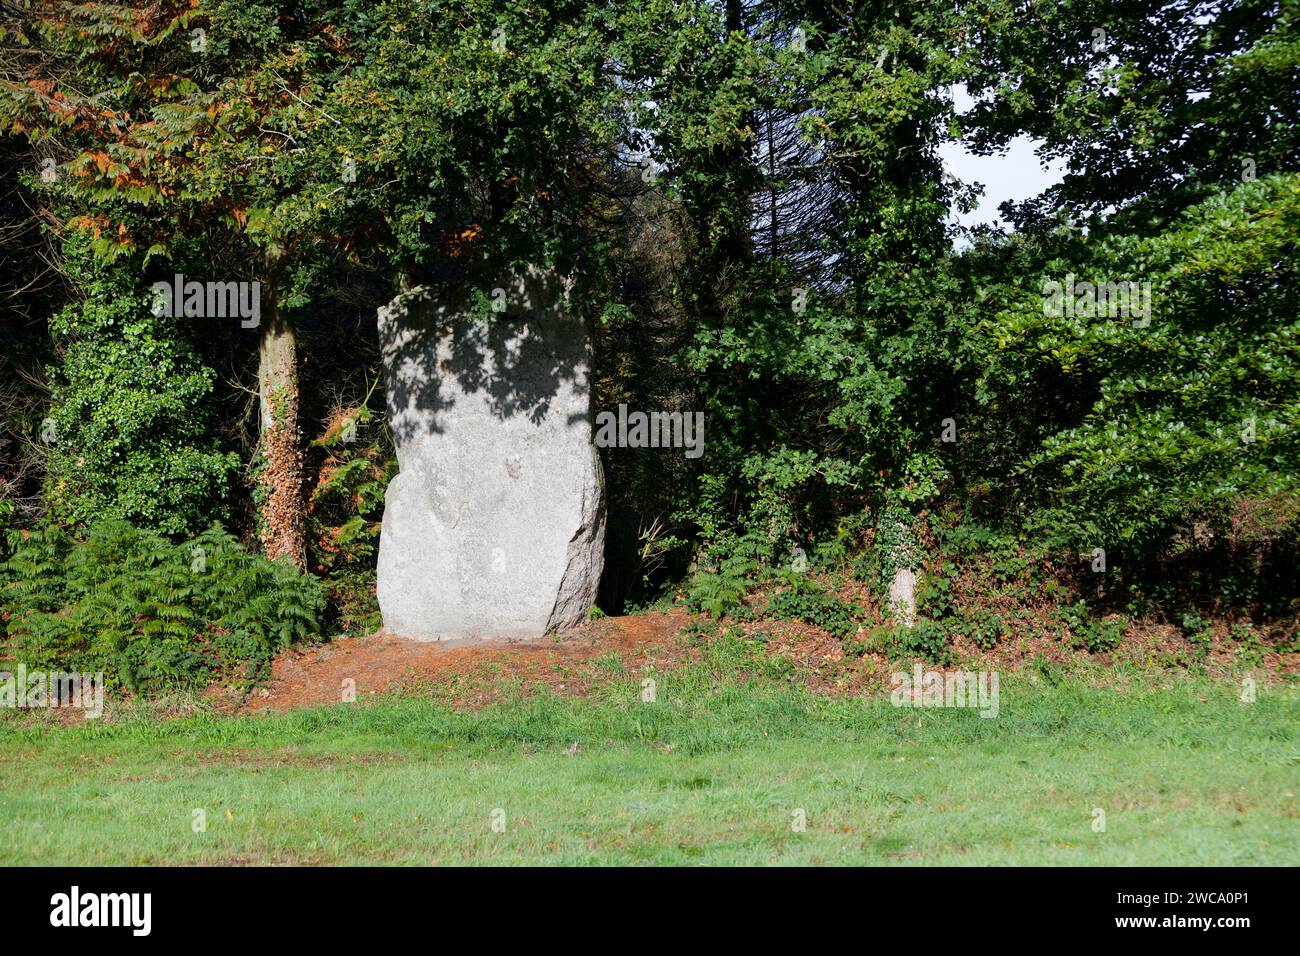 The Kerelcun menhir is 4 m high and is the only one in the town of La Feuillée in Finistère, Brittany. Stock Photo